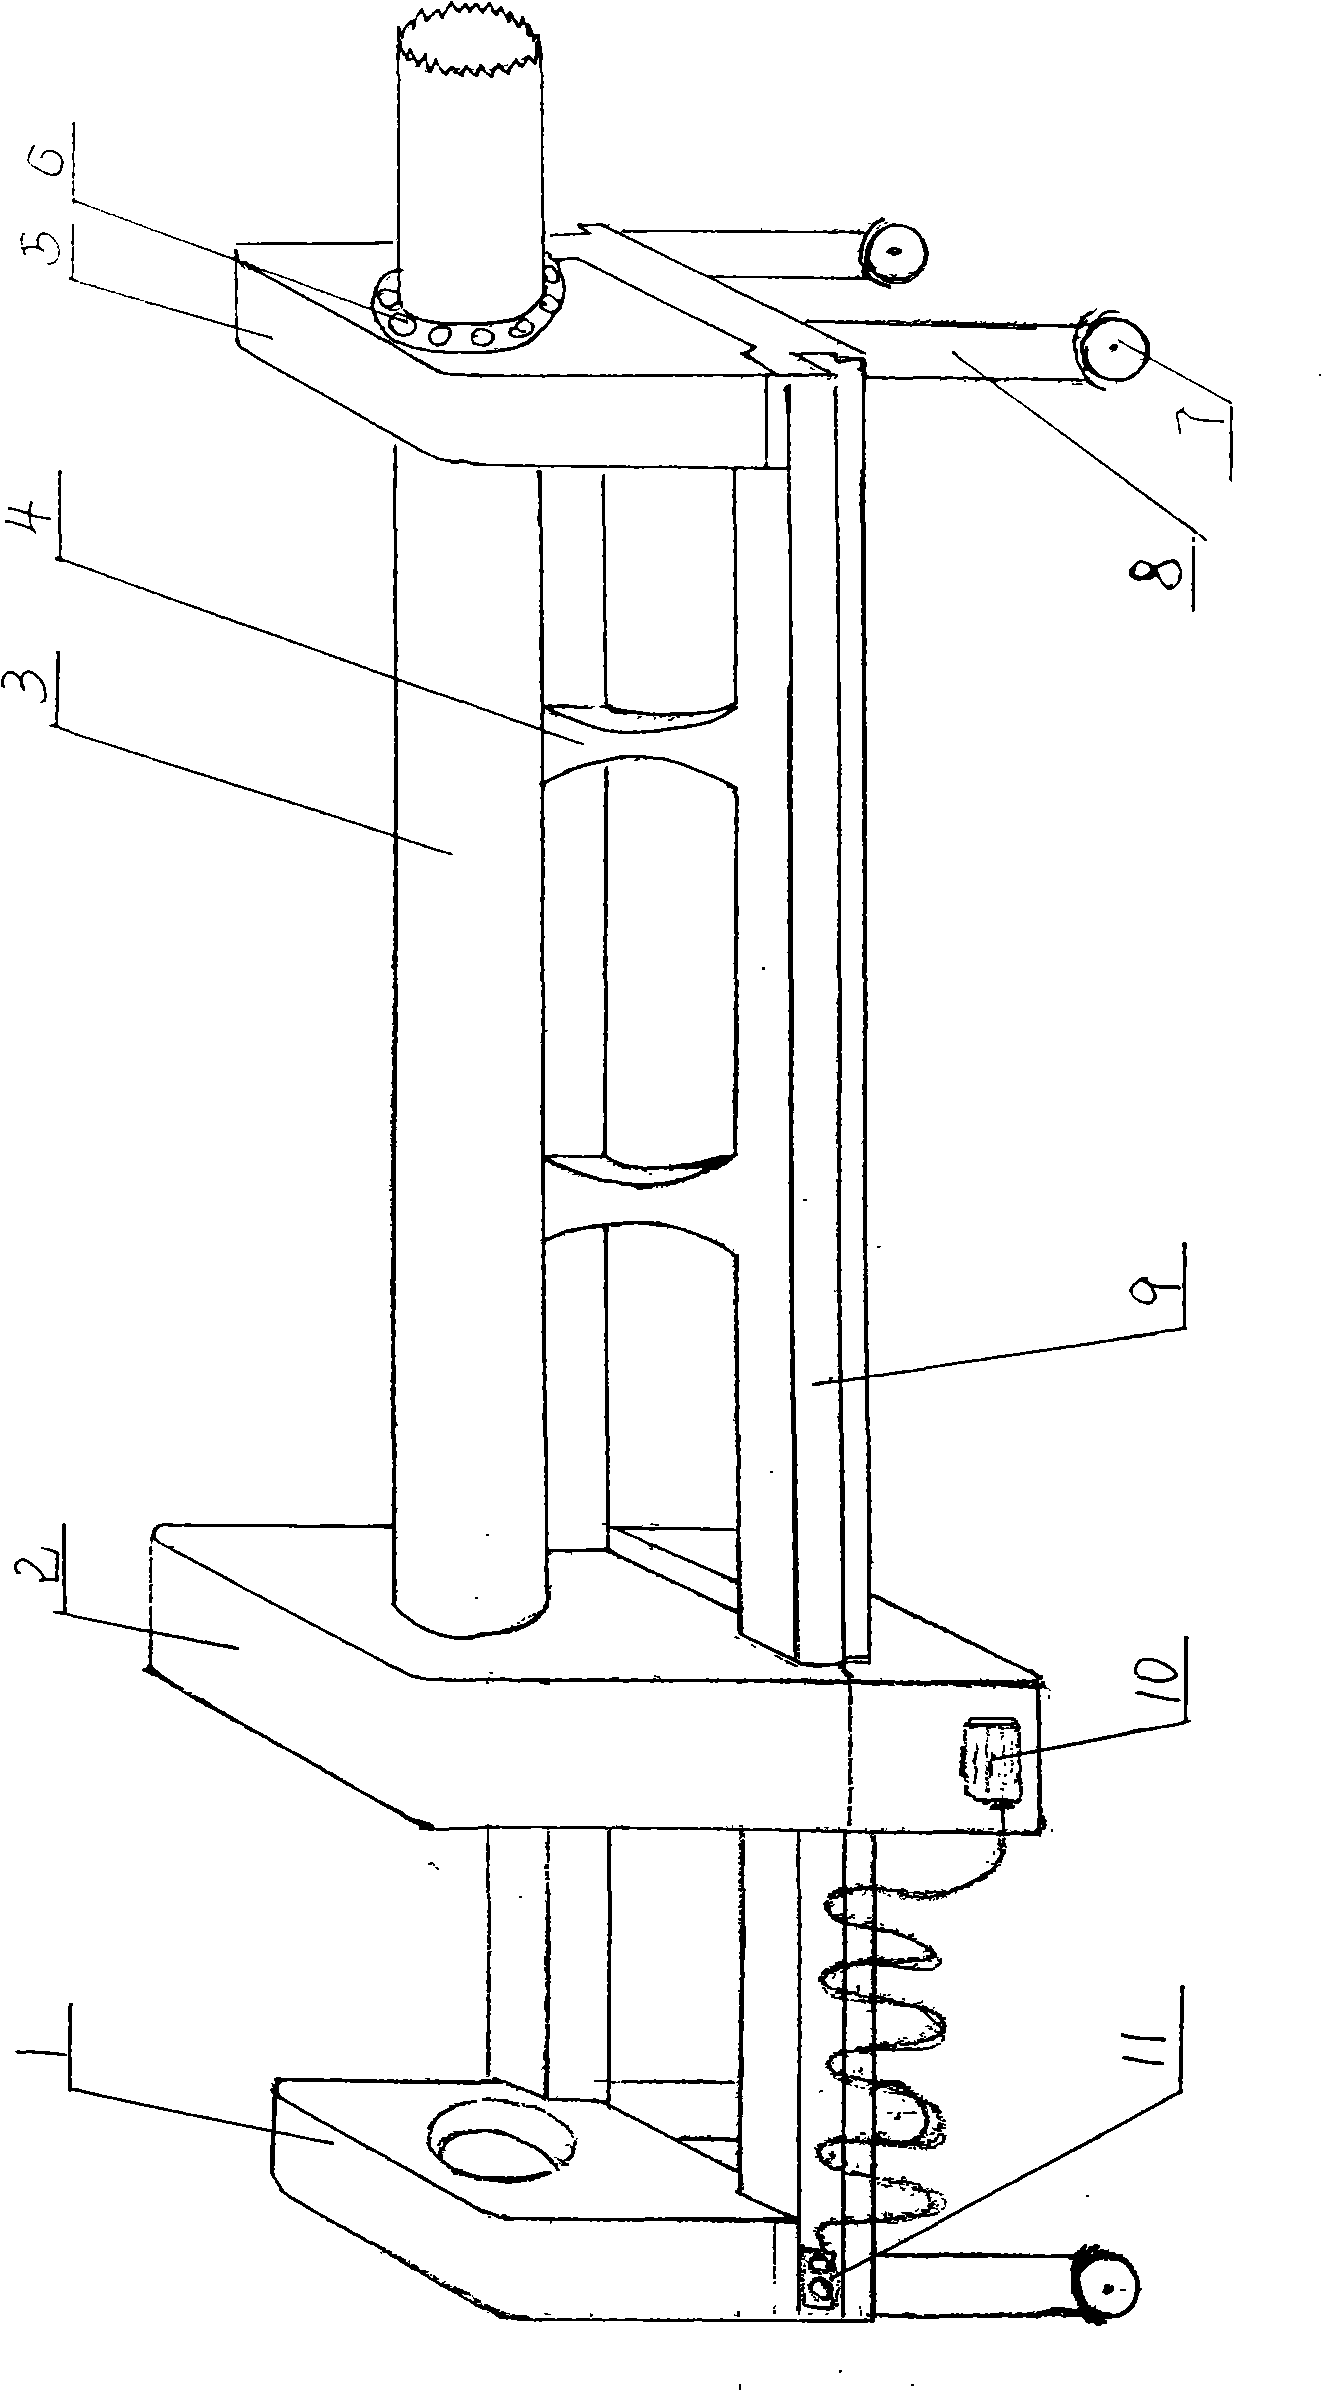 Material charging and discharging device for production of metal magnesium